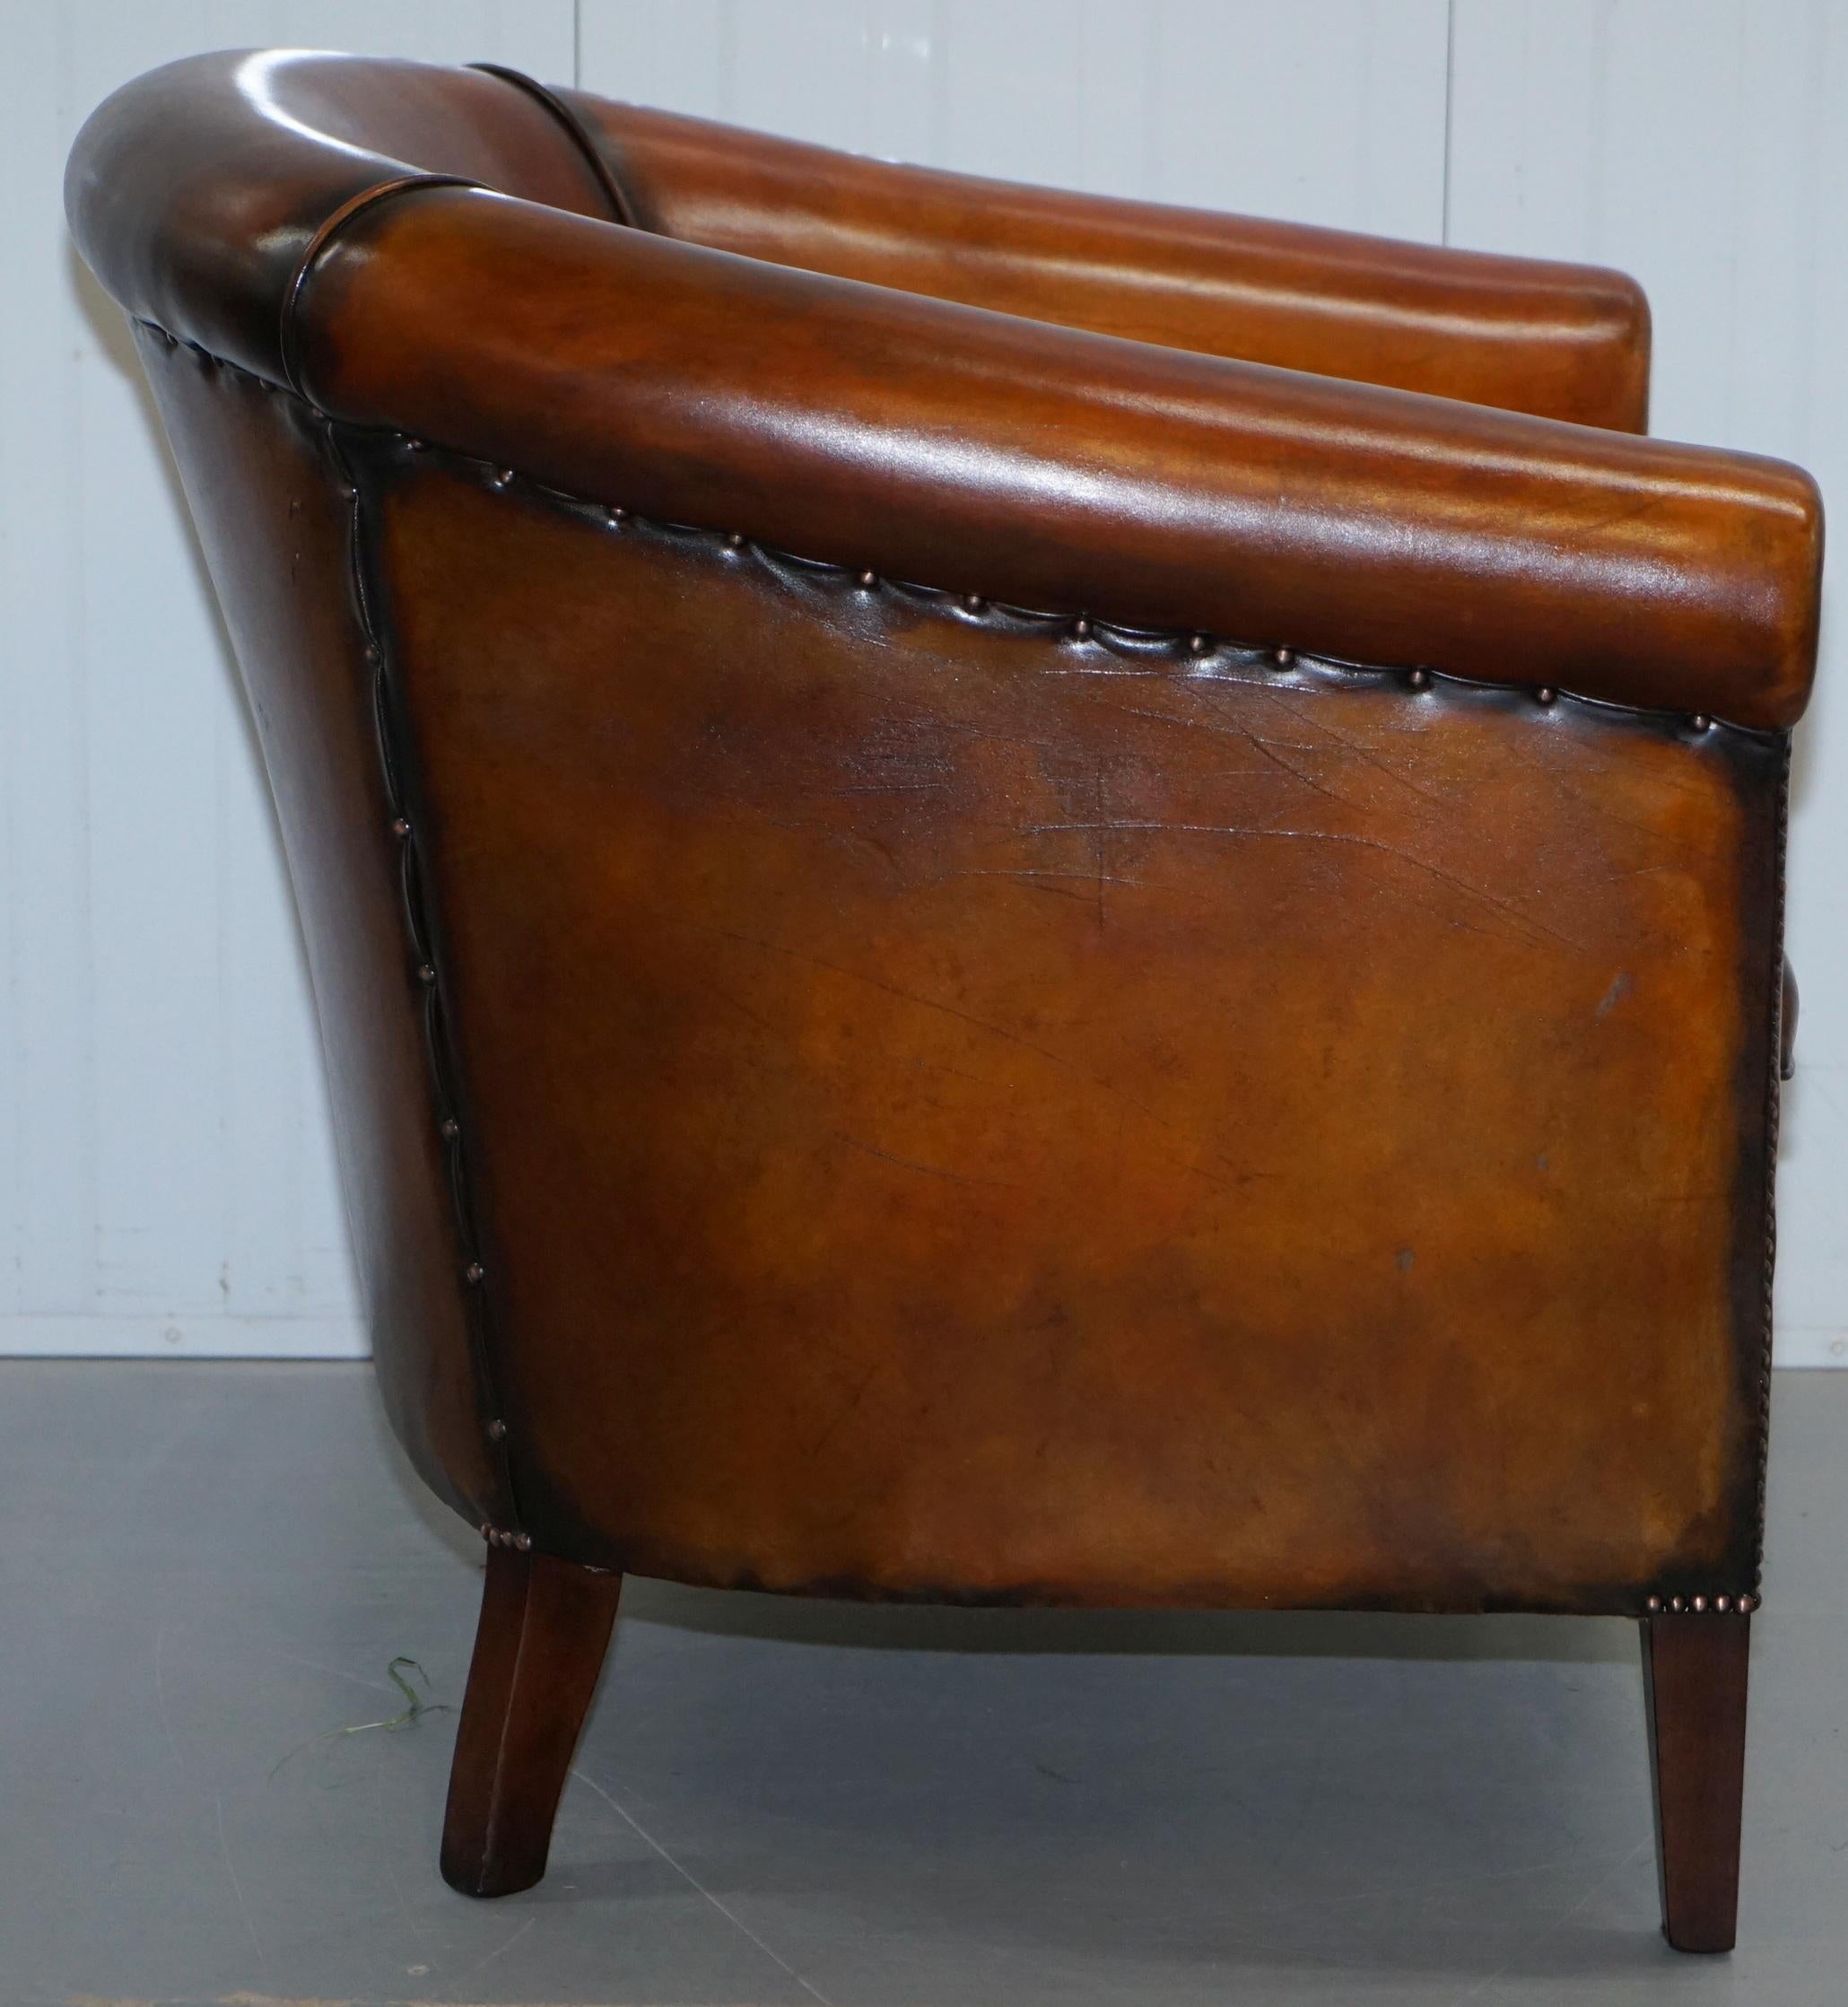 James Bond 007 Armchair from Spectre Leather Chairs of Bath Fully Restored 7